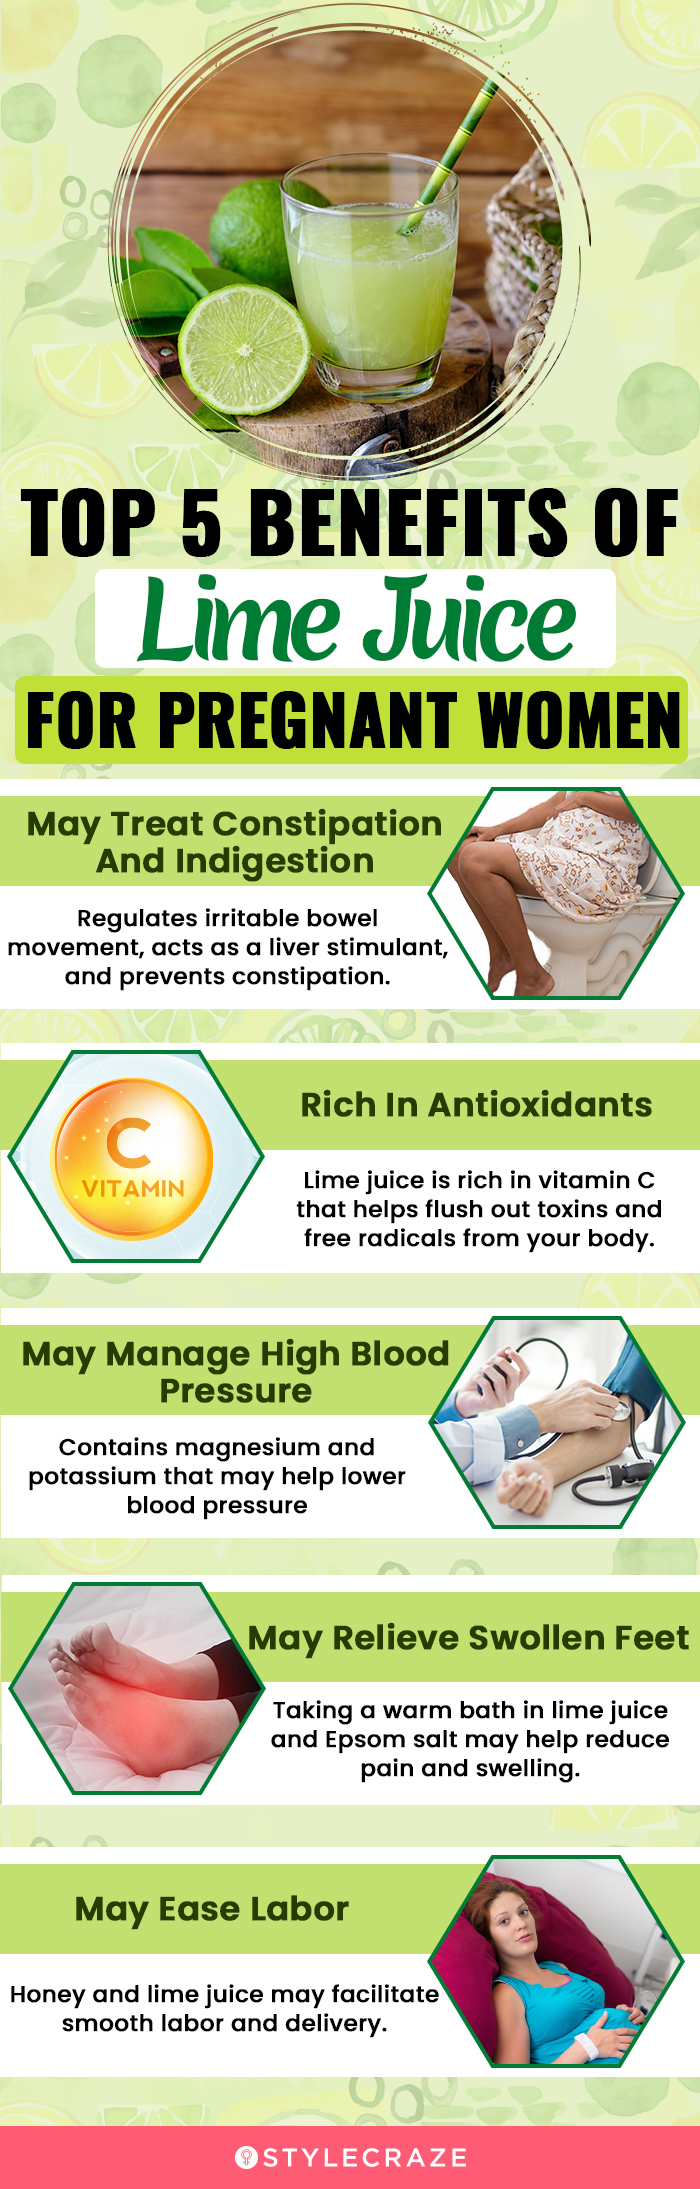 top 5 benefits of lime juice for pregnant women (infographic)